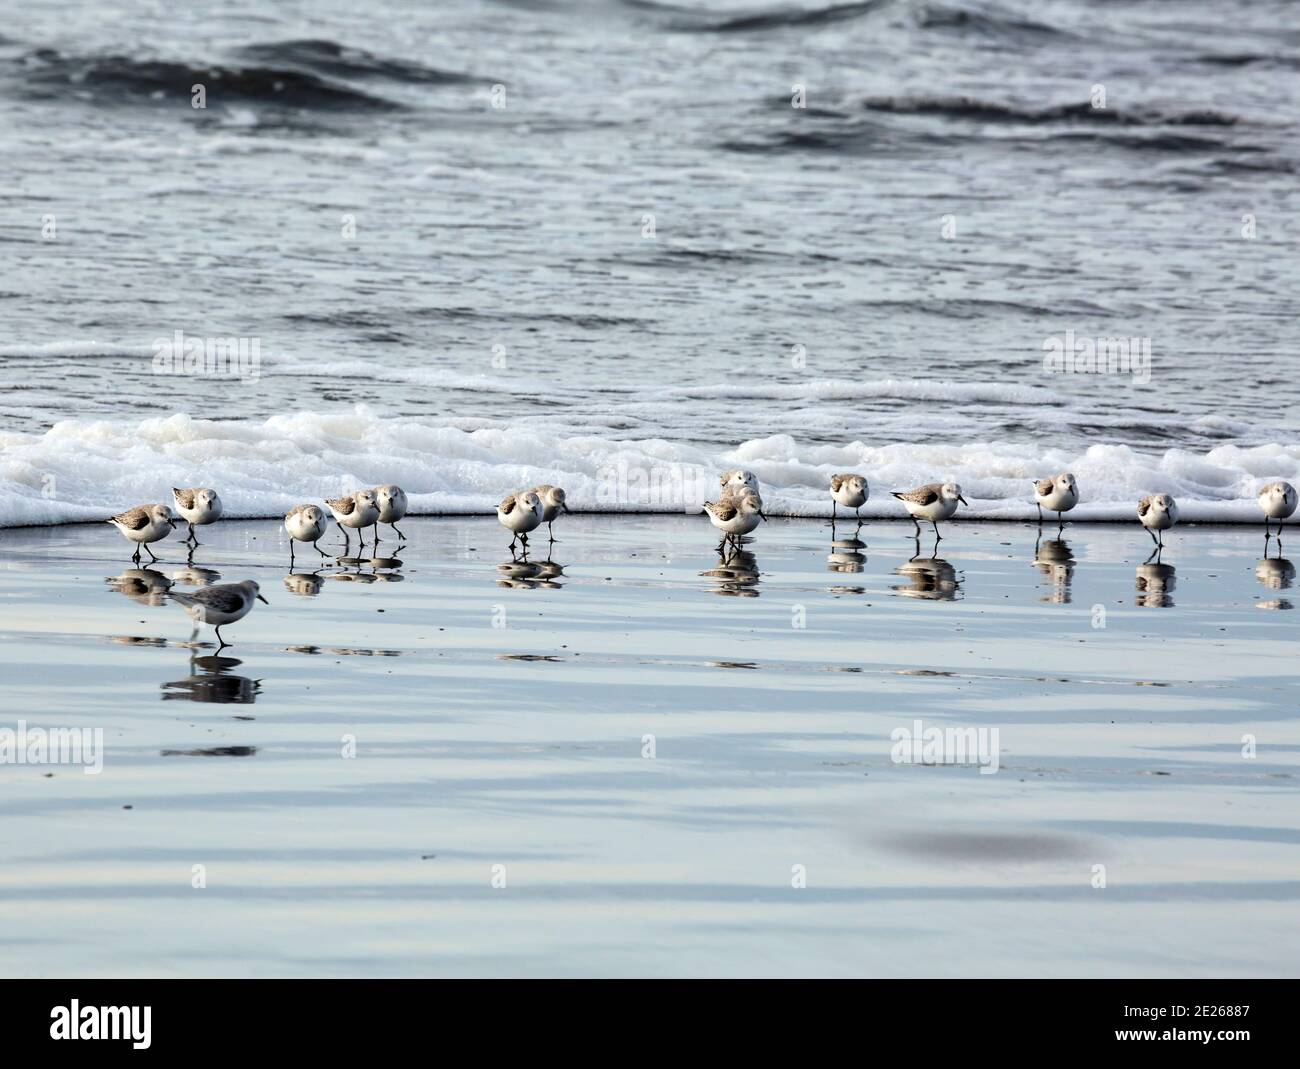 WA19090-00...WASHINGTON - Sandpipers on Benson Beach in Cape Disappointment State Park. Stock Photo